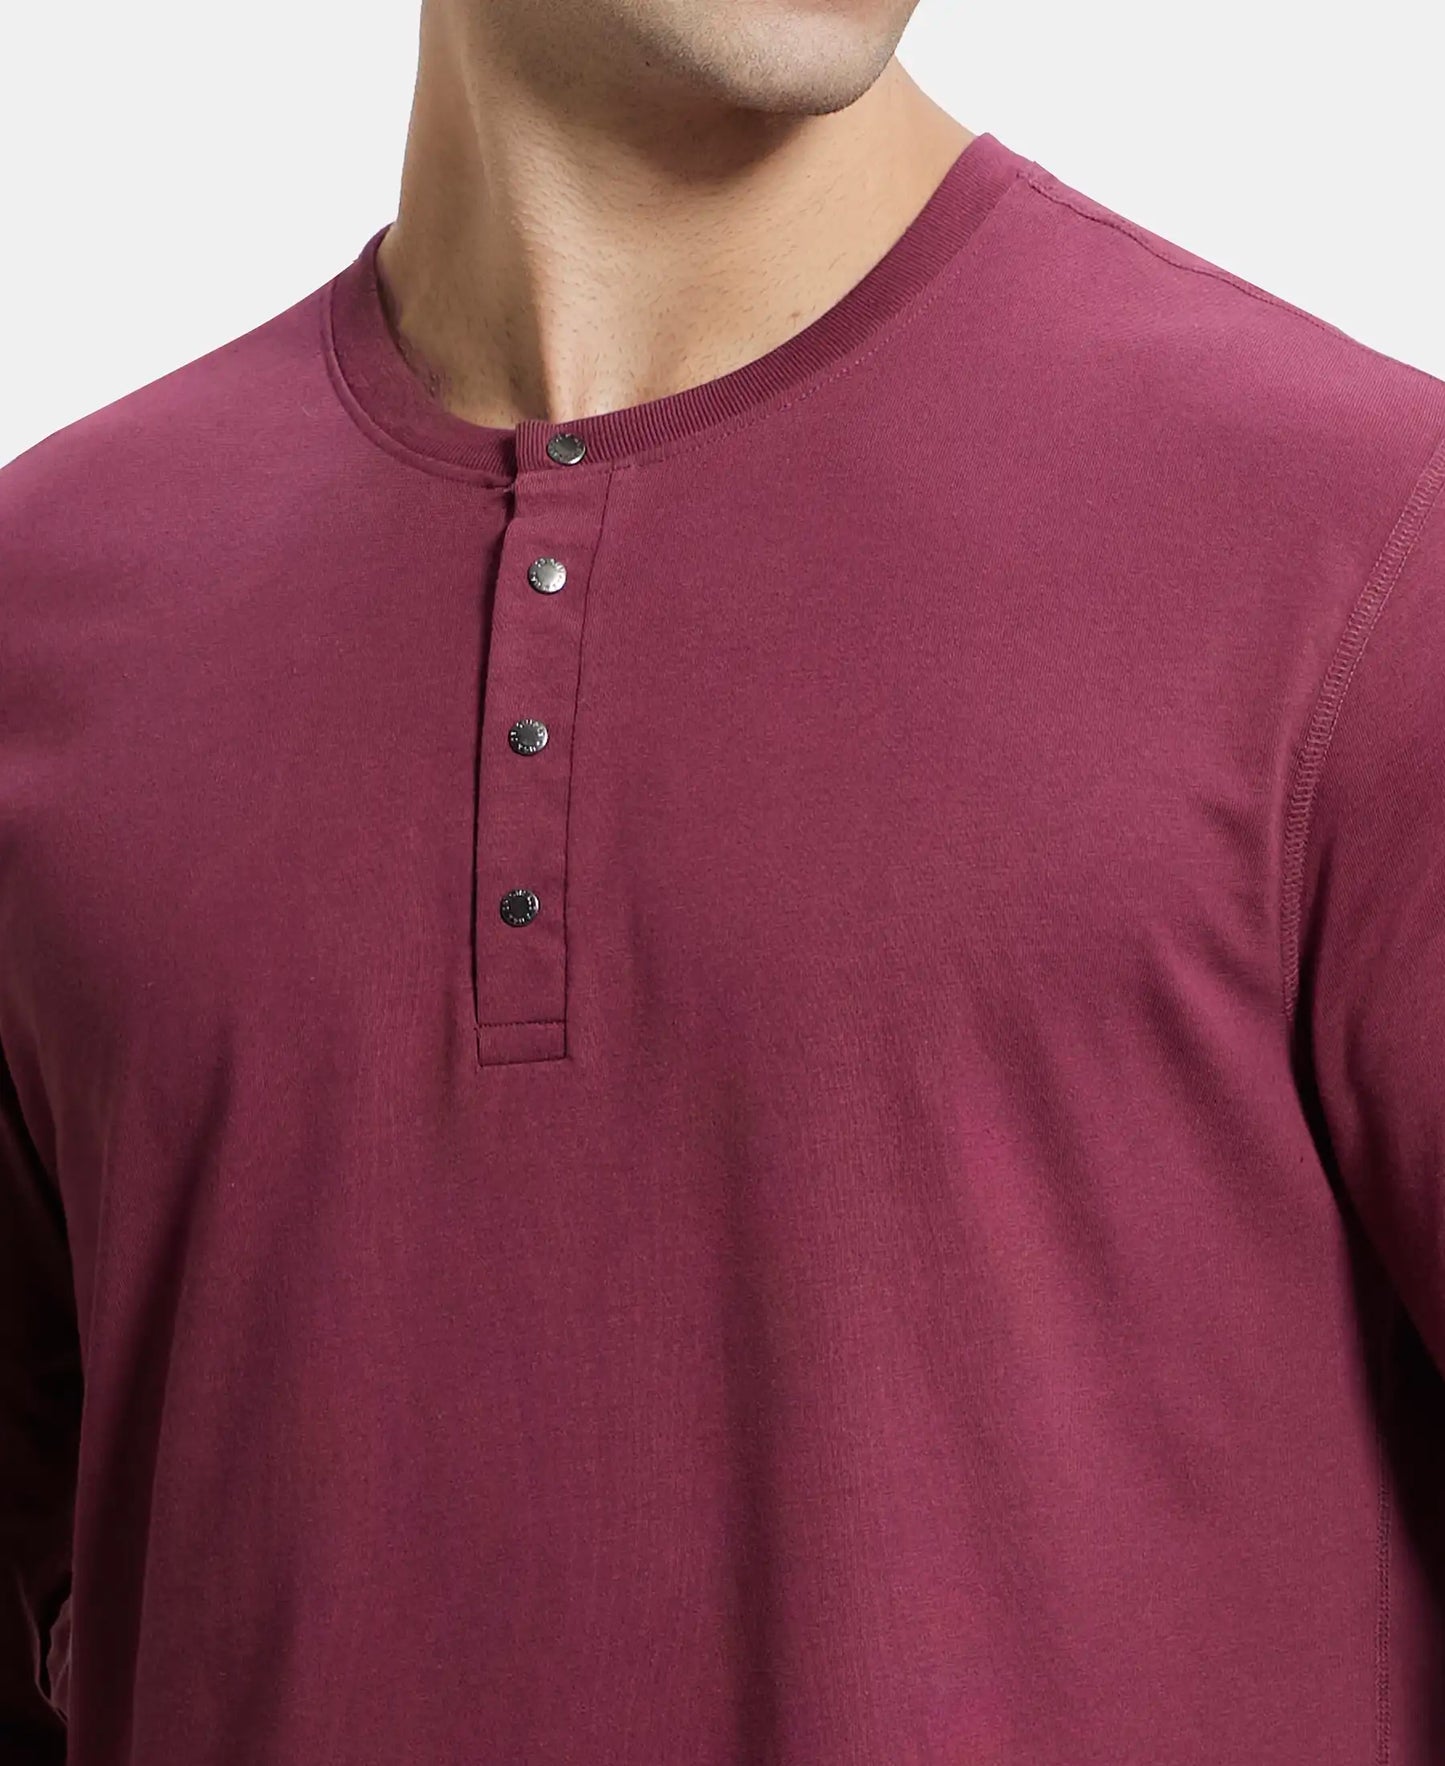 Super Combed Cotton Rich Solid Full Sleeve Henley T-Shirt - Burgundy-6